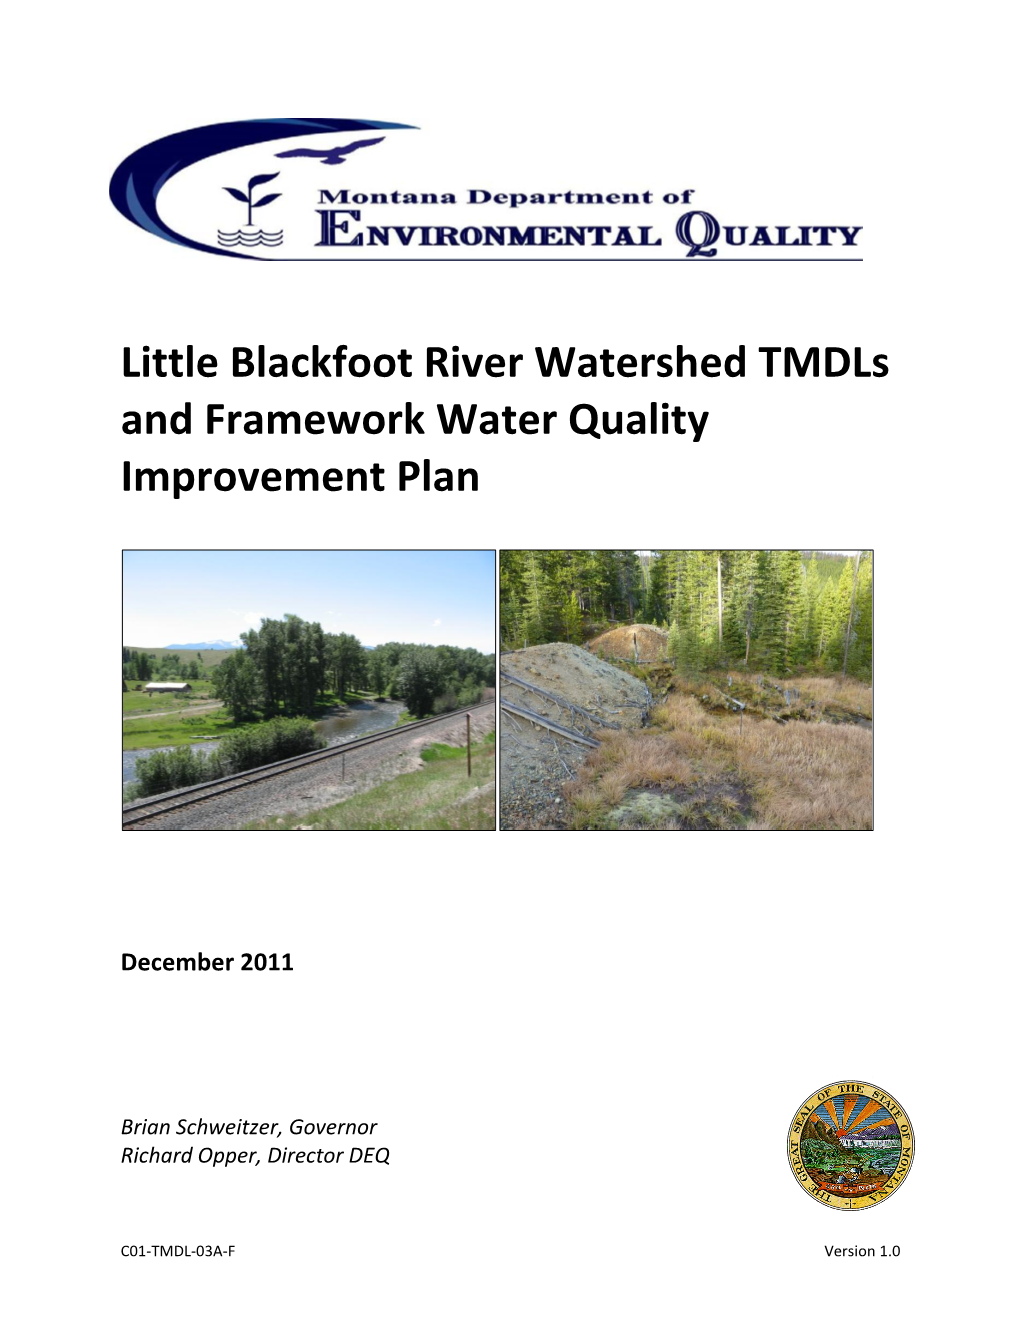 Little Blackfoot River Watershed Tmdls and Framework Water Quality Improvement Plan